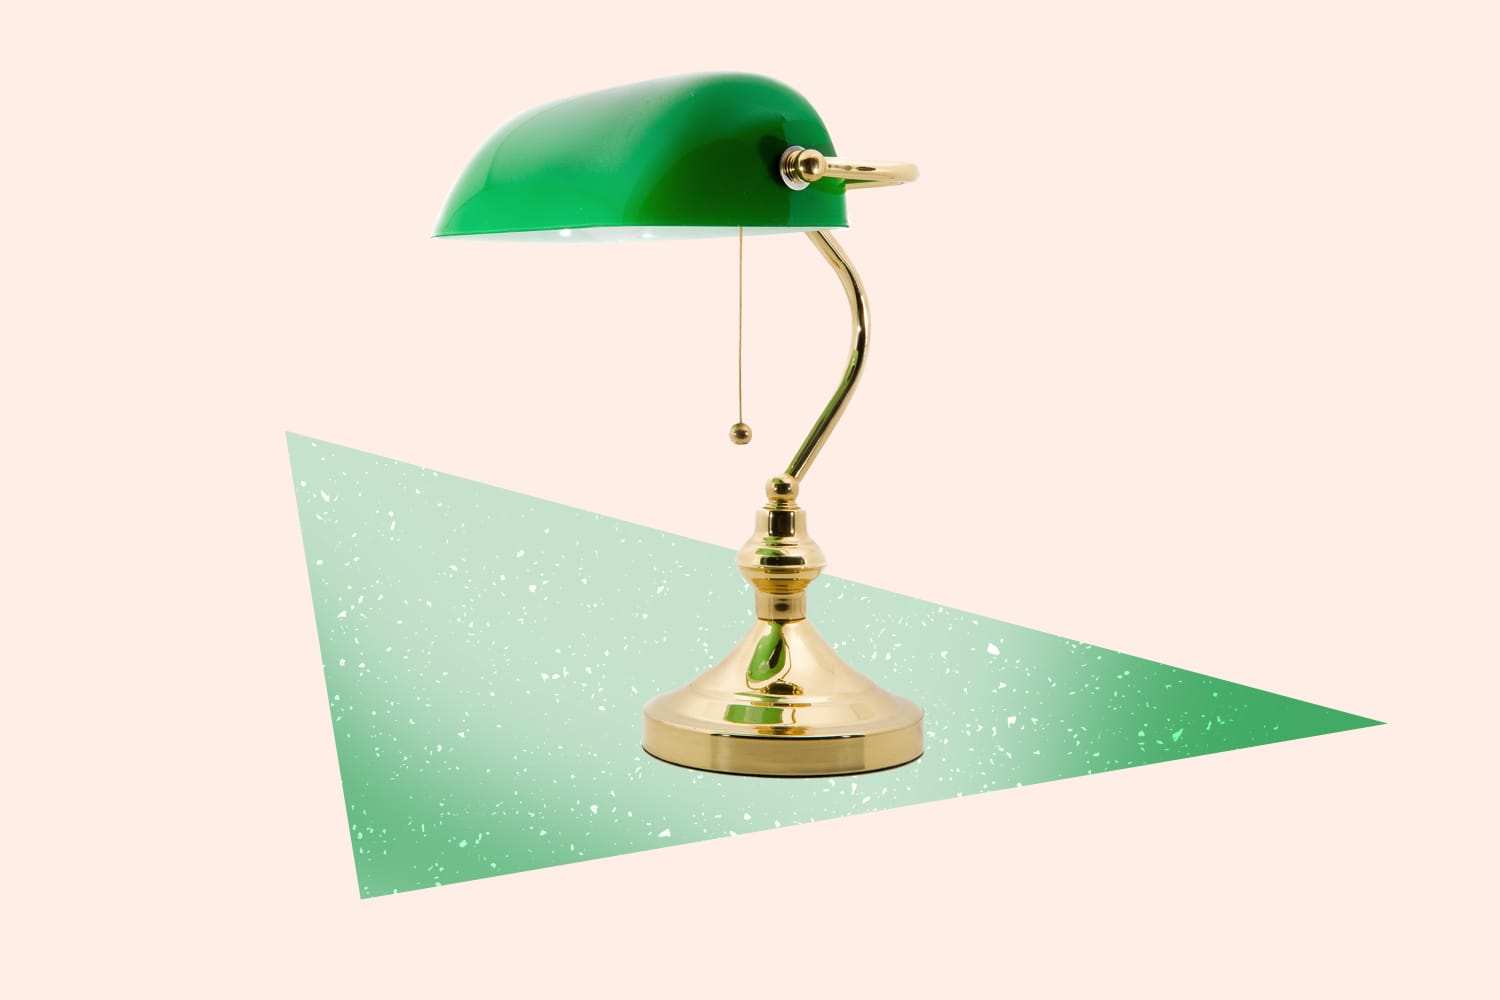 A History of the Banker's Lamp, the World's Beloved Green Desk